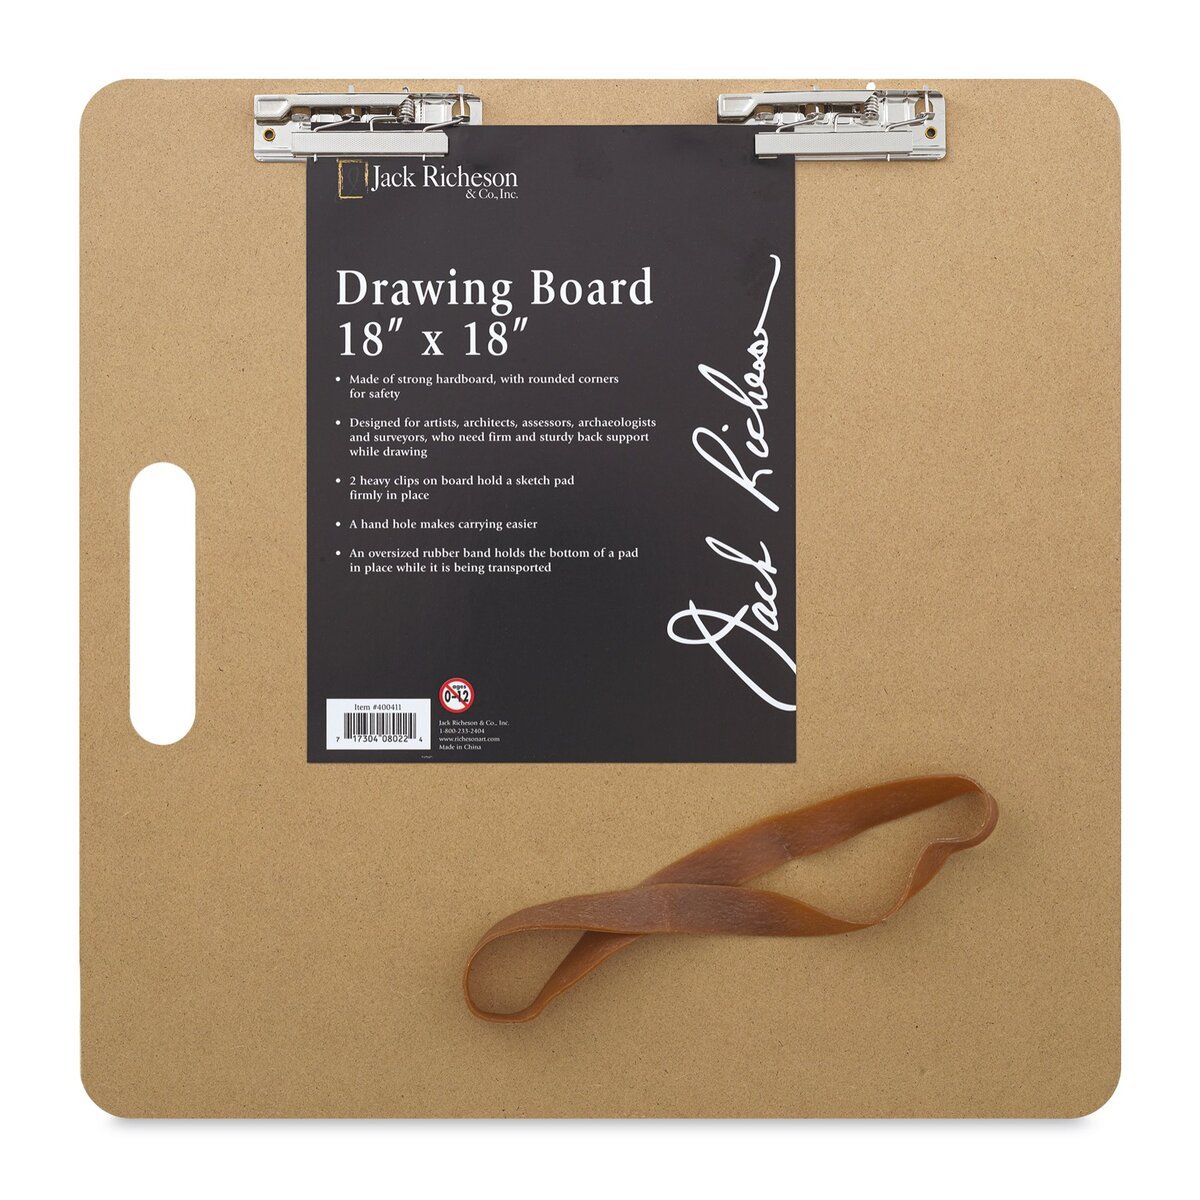 A Good Size Drawing Board